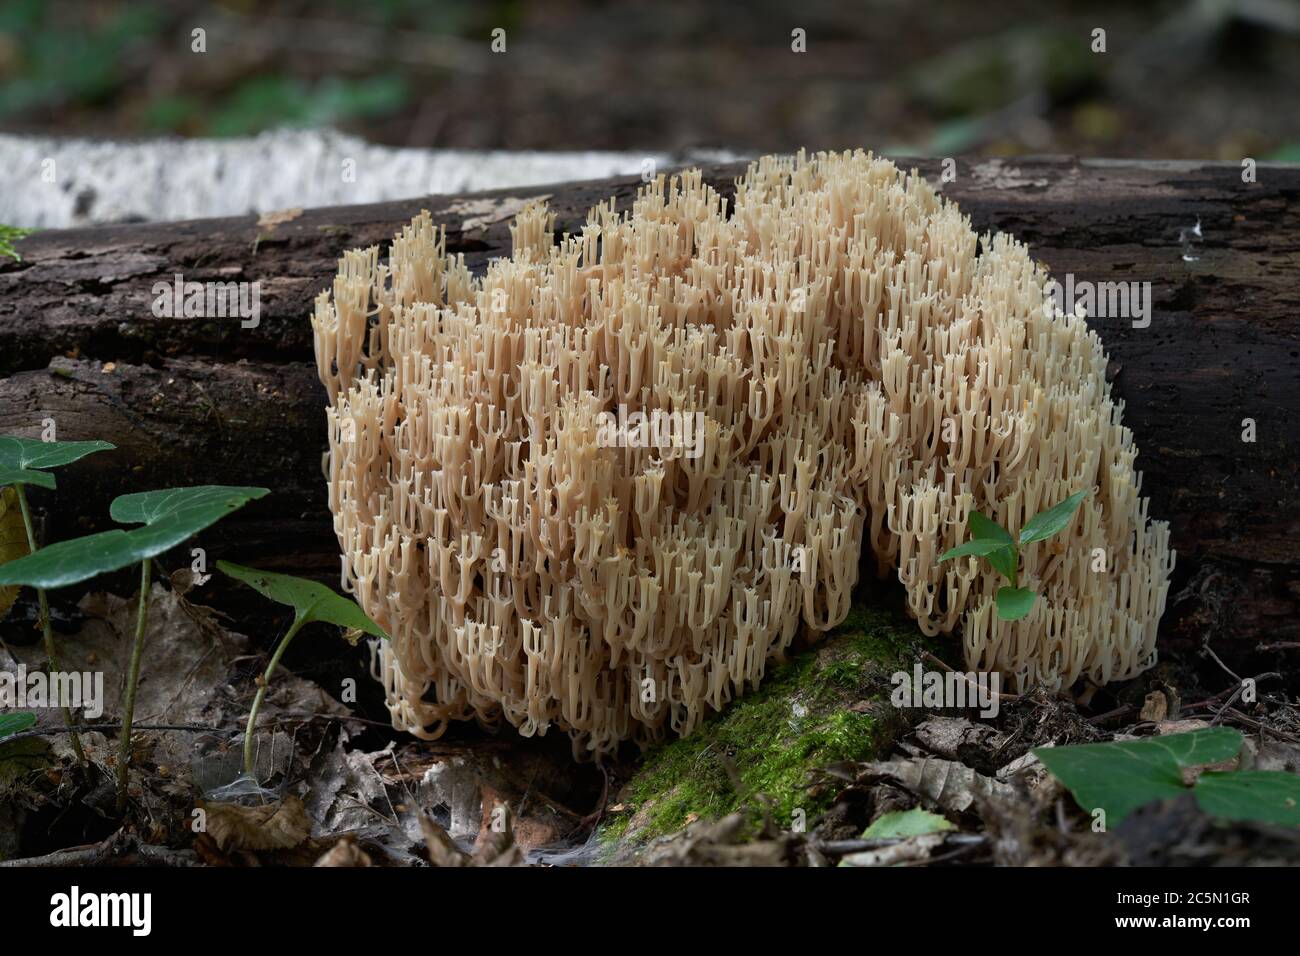 Coral mushroom Artomyces pyxidatus growing on the tree. Also known as crown coral or crown-tipped coral. Natural environment, inedible mushroom. Stock Photo